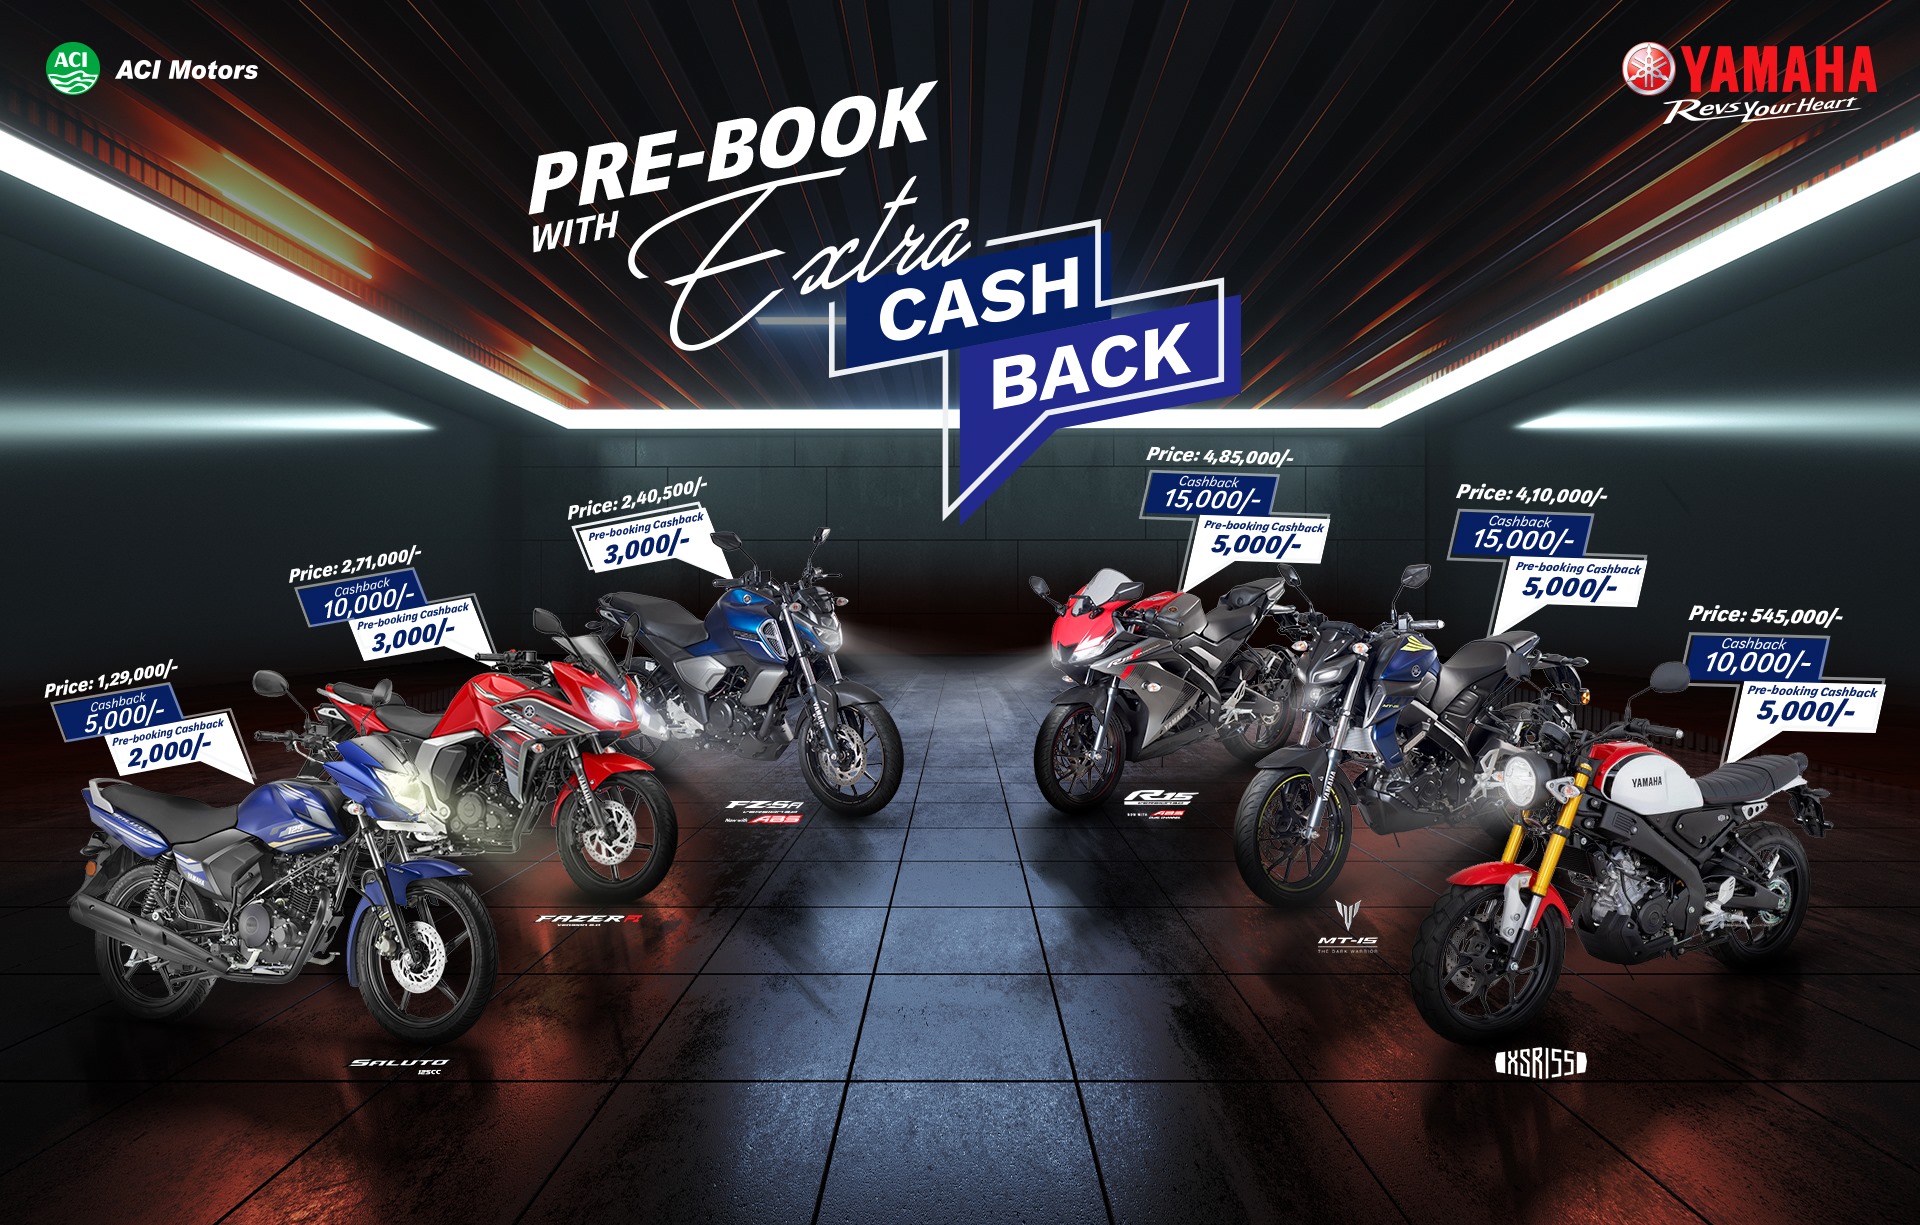 Yamaha pre-booking offer